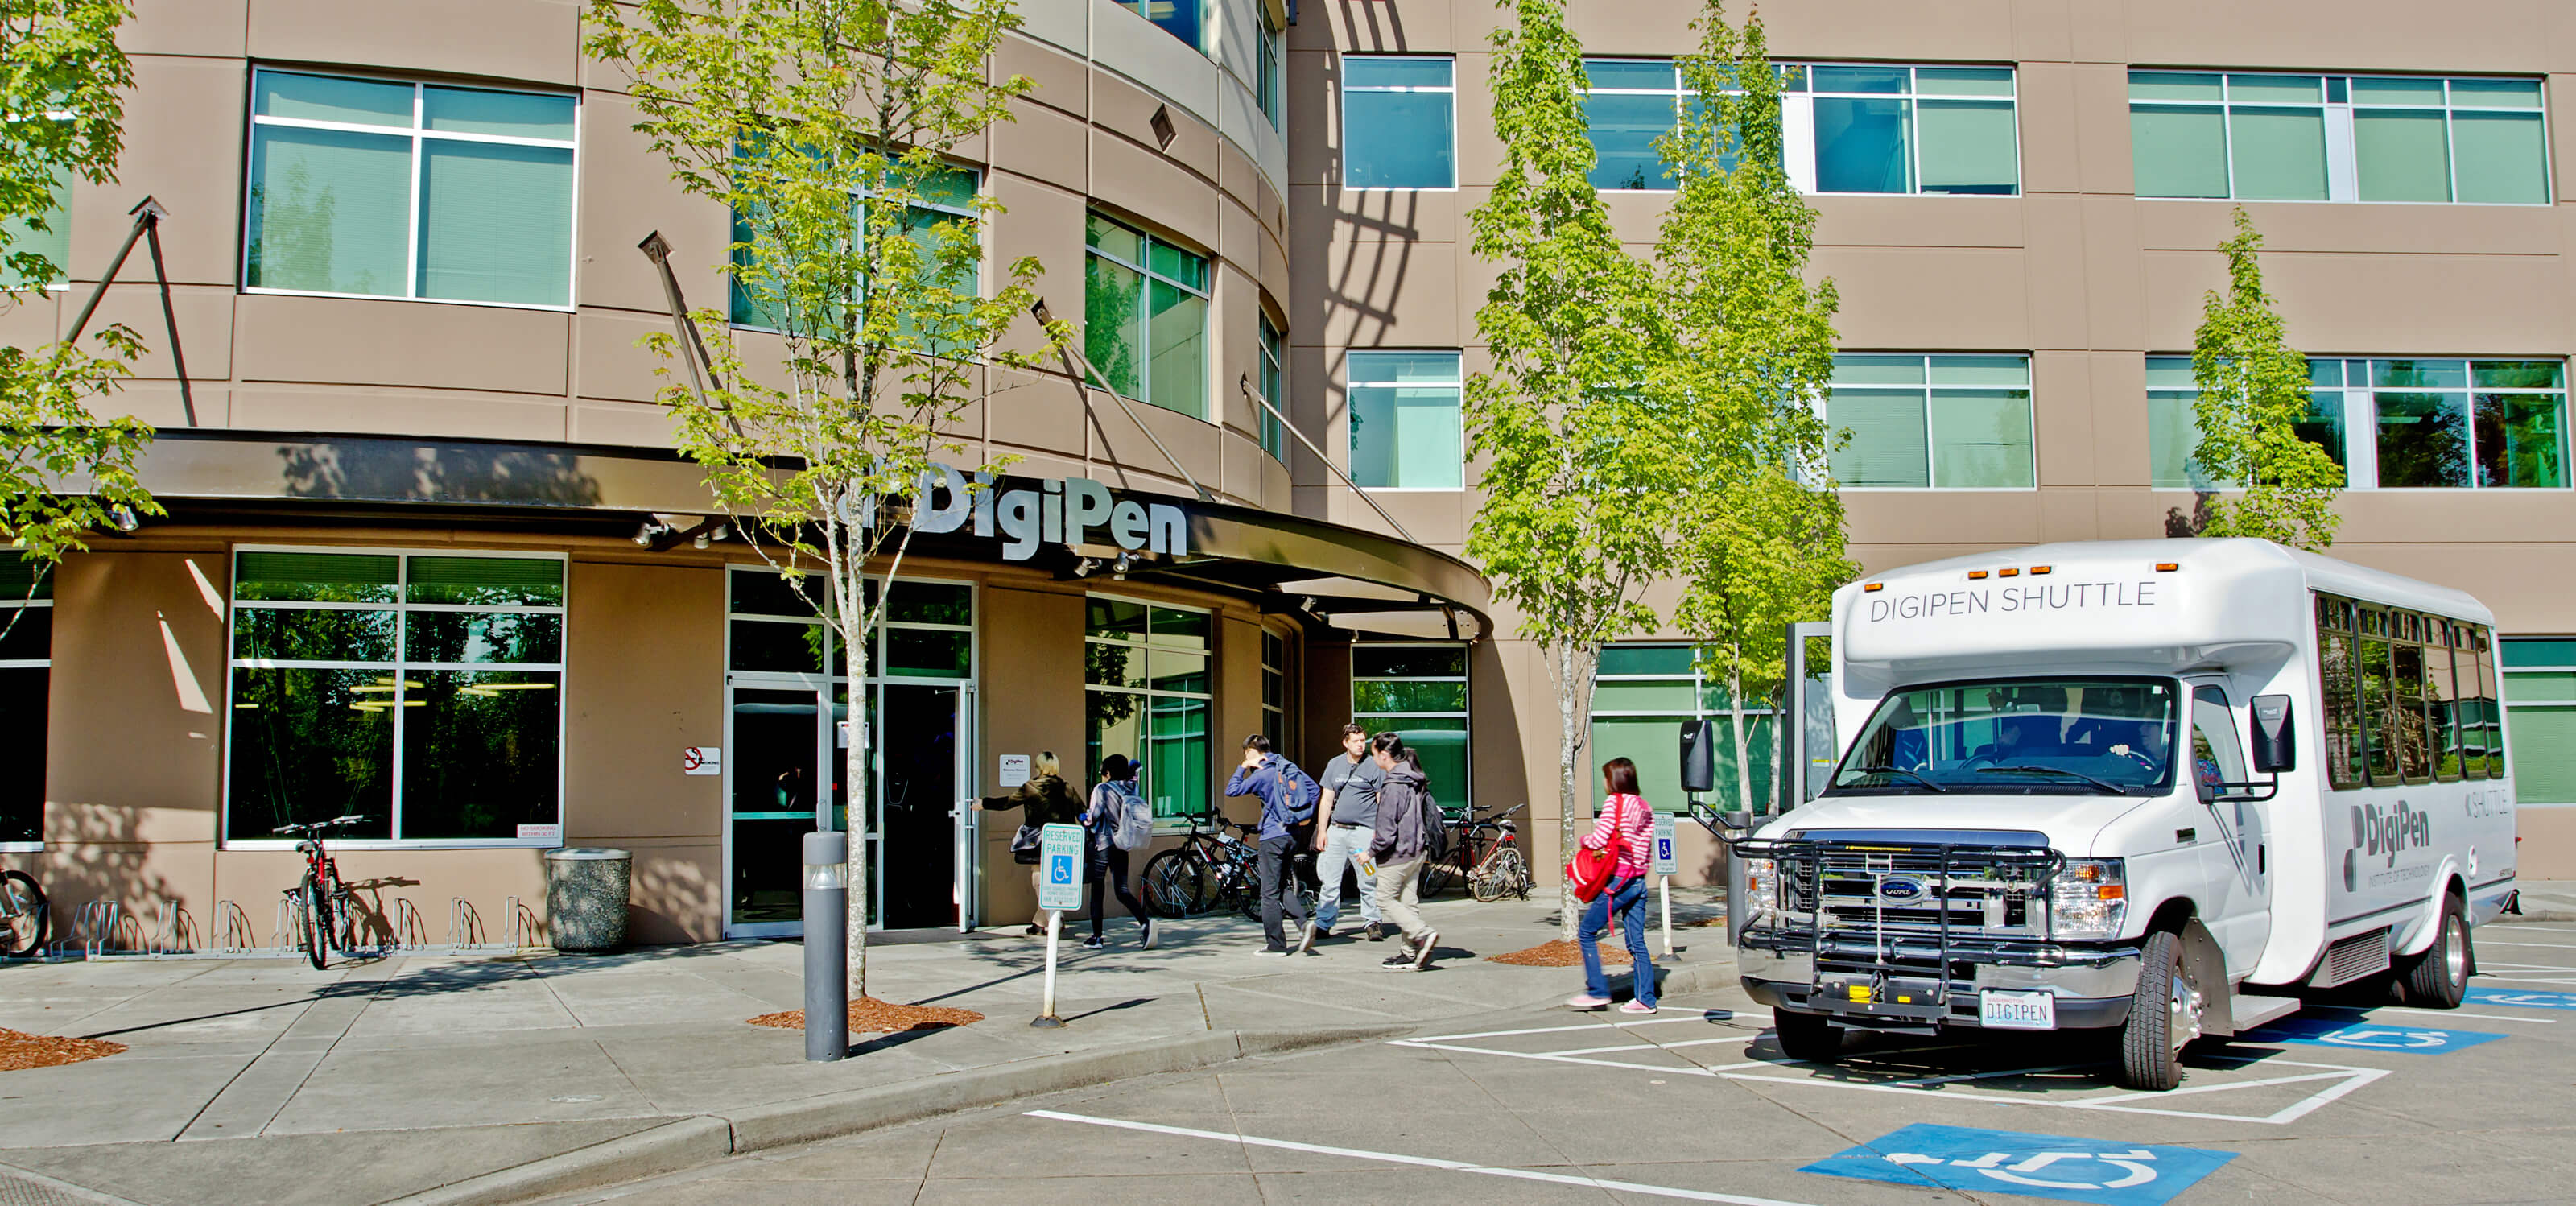 Students getting off the DigiPen shuttle bus in front of the DigiPen building